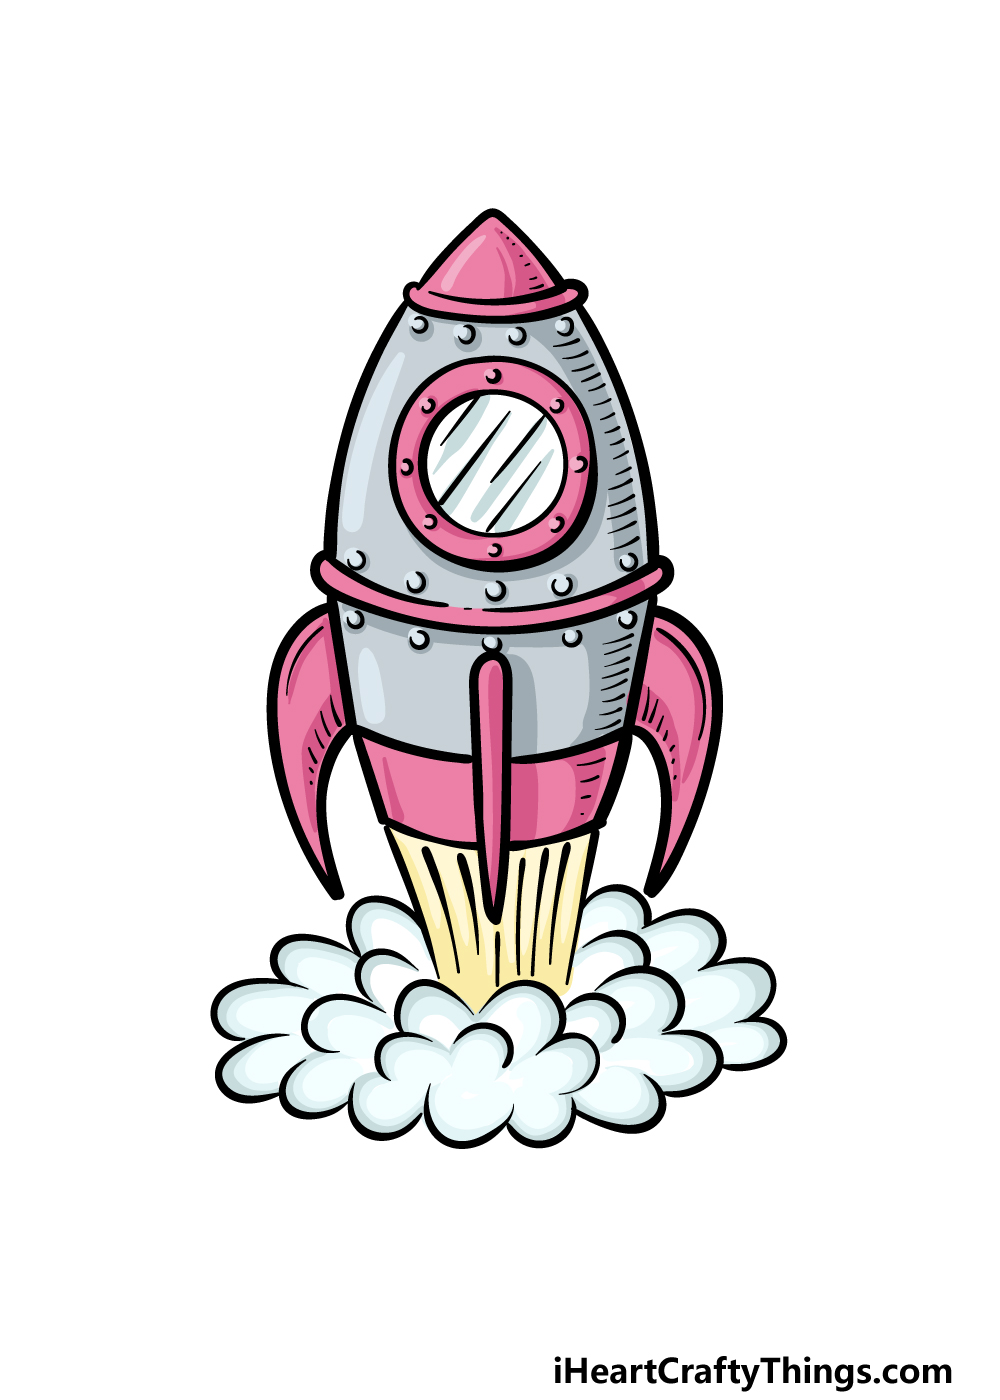 🚀 How to Draw a Rocket Ship | Easy Drawing for Kids - Otoons.net